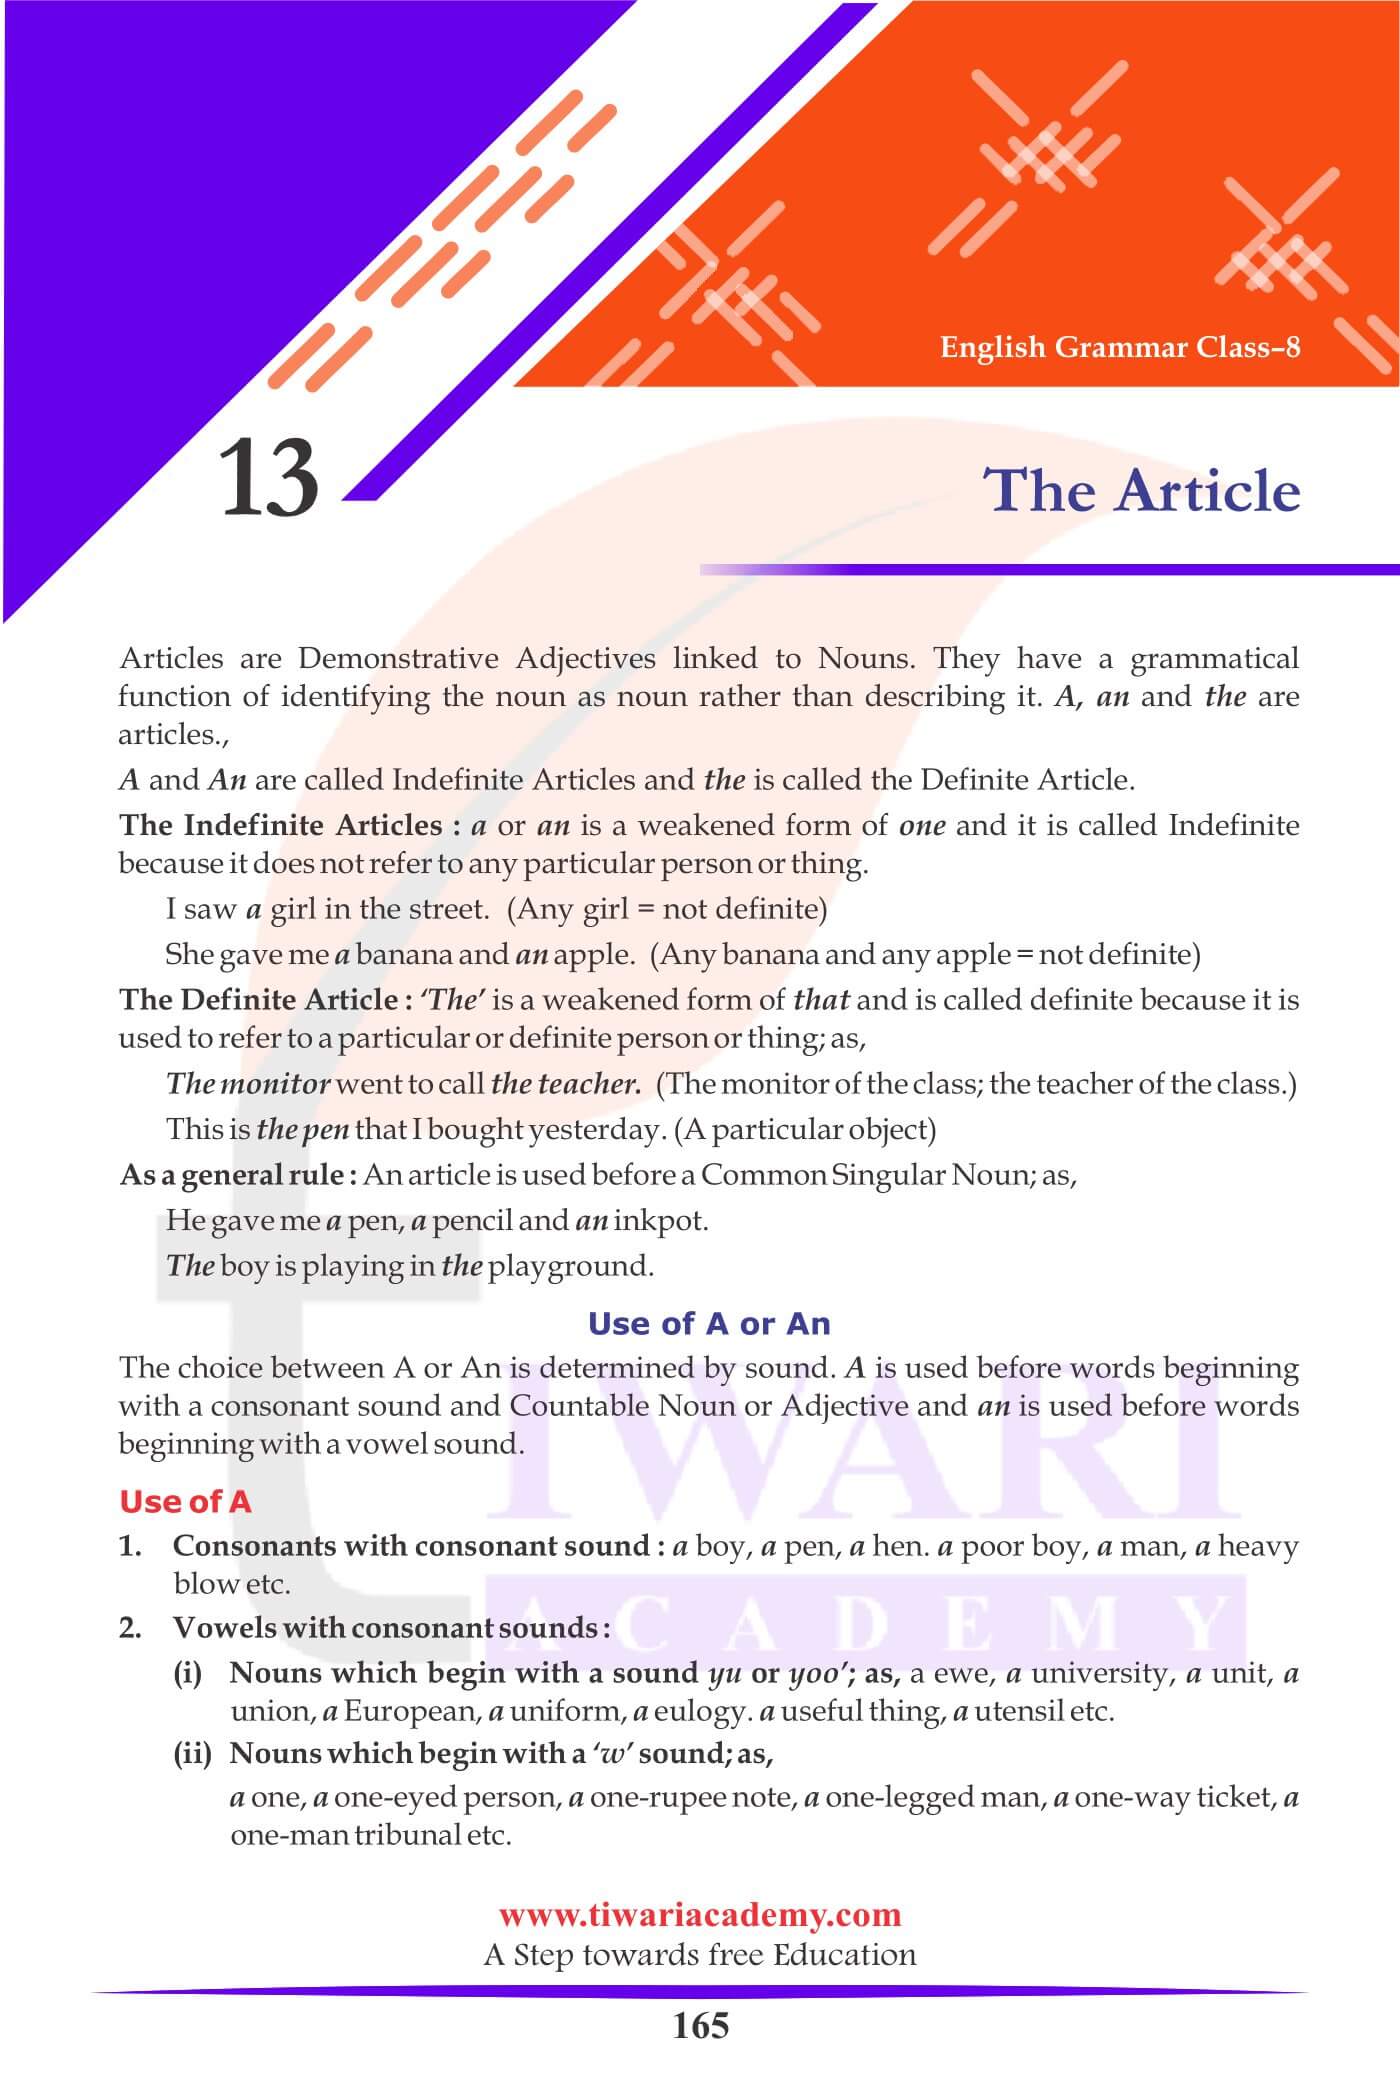 Class 8 English Grammar Chapter 13 The Article